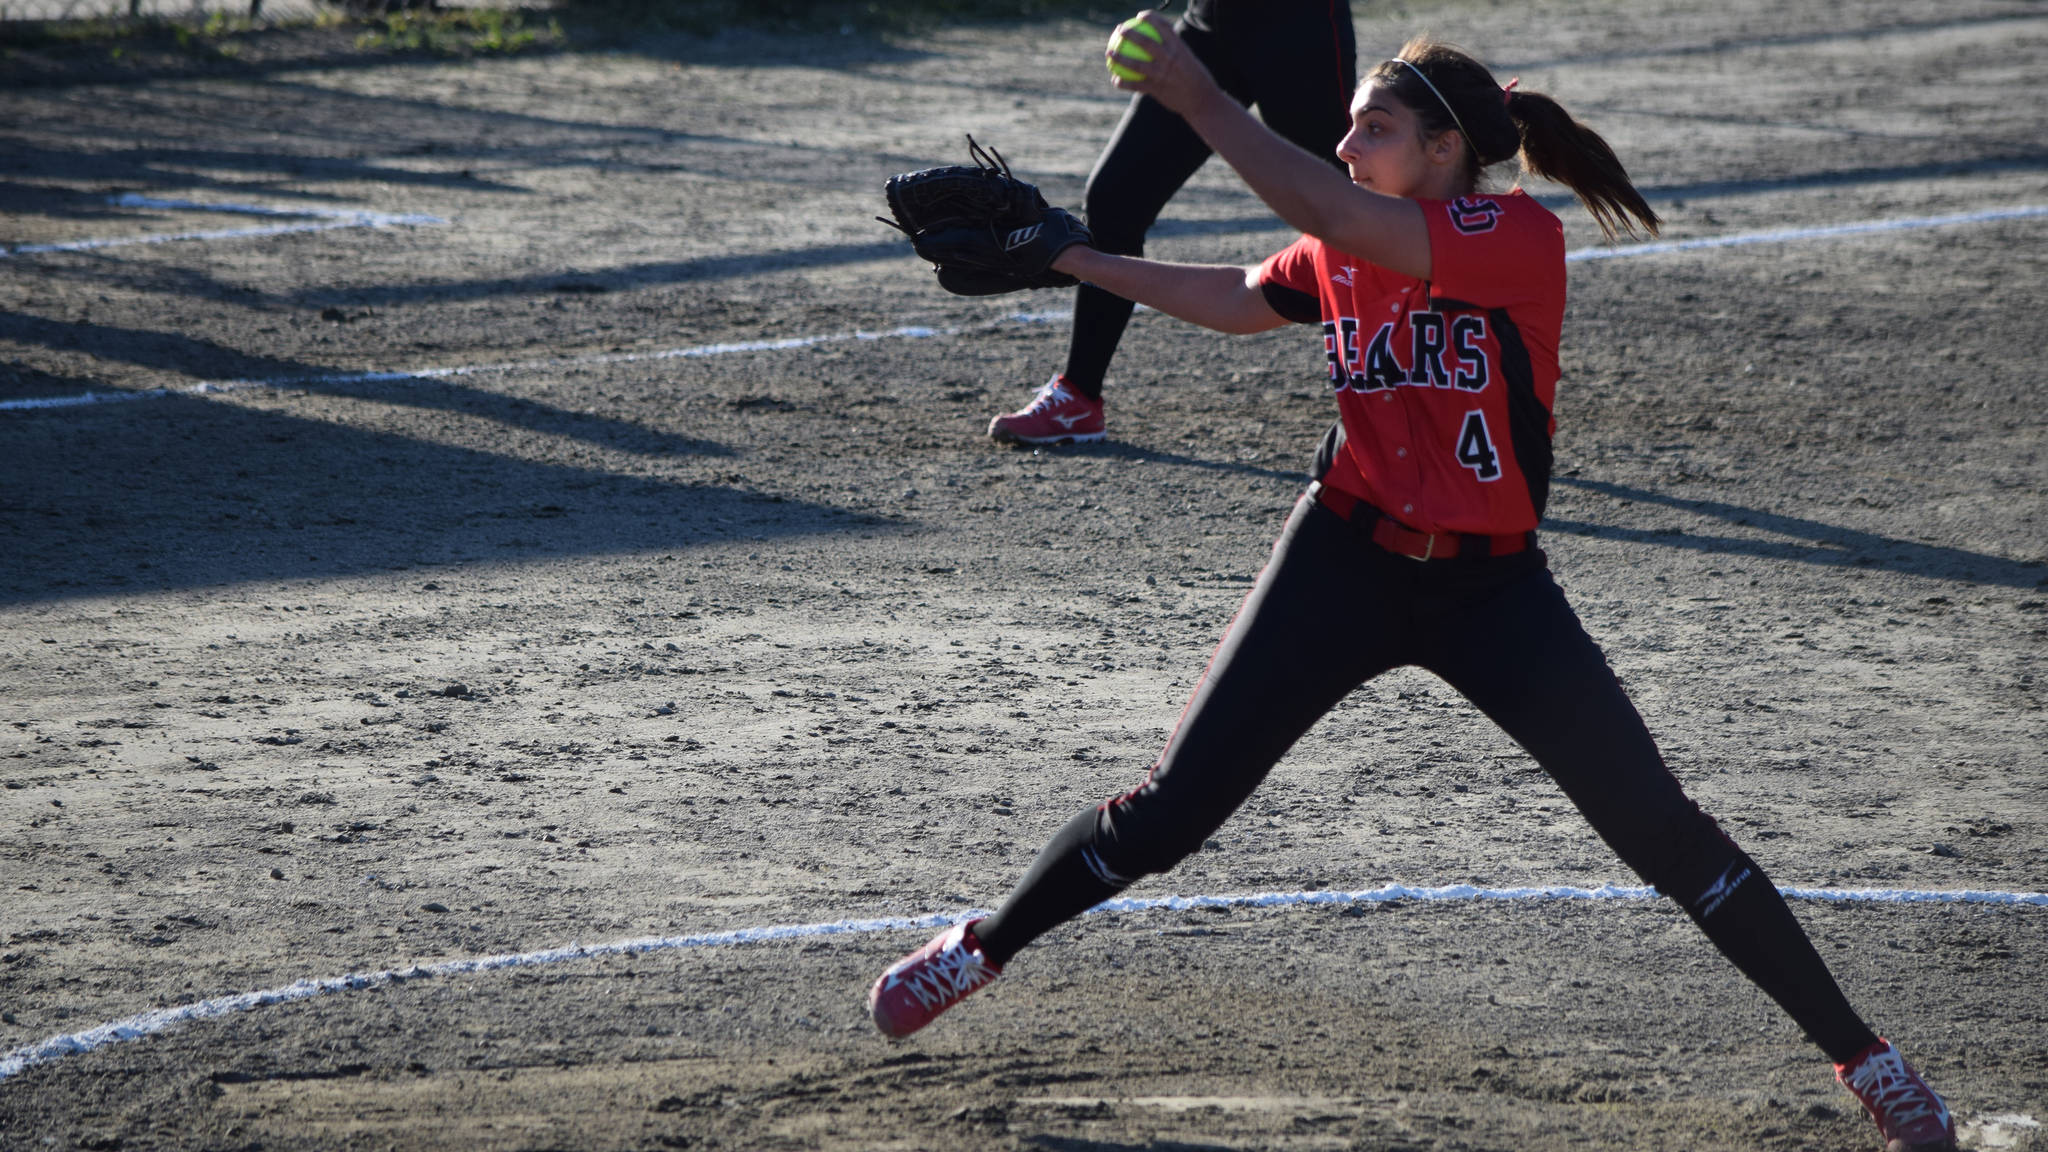 Juneau-Douglas High School’s Leah Spargo pitches against Thunder Mountain in the Region V softball tournament Friday night at Melvin Park. (Nolin Ainsworth | Juneau Empire)